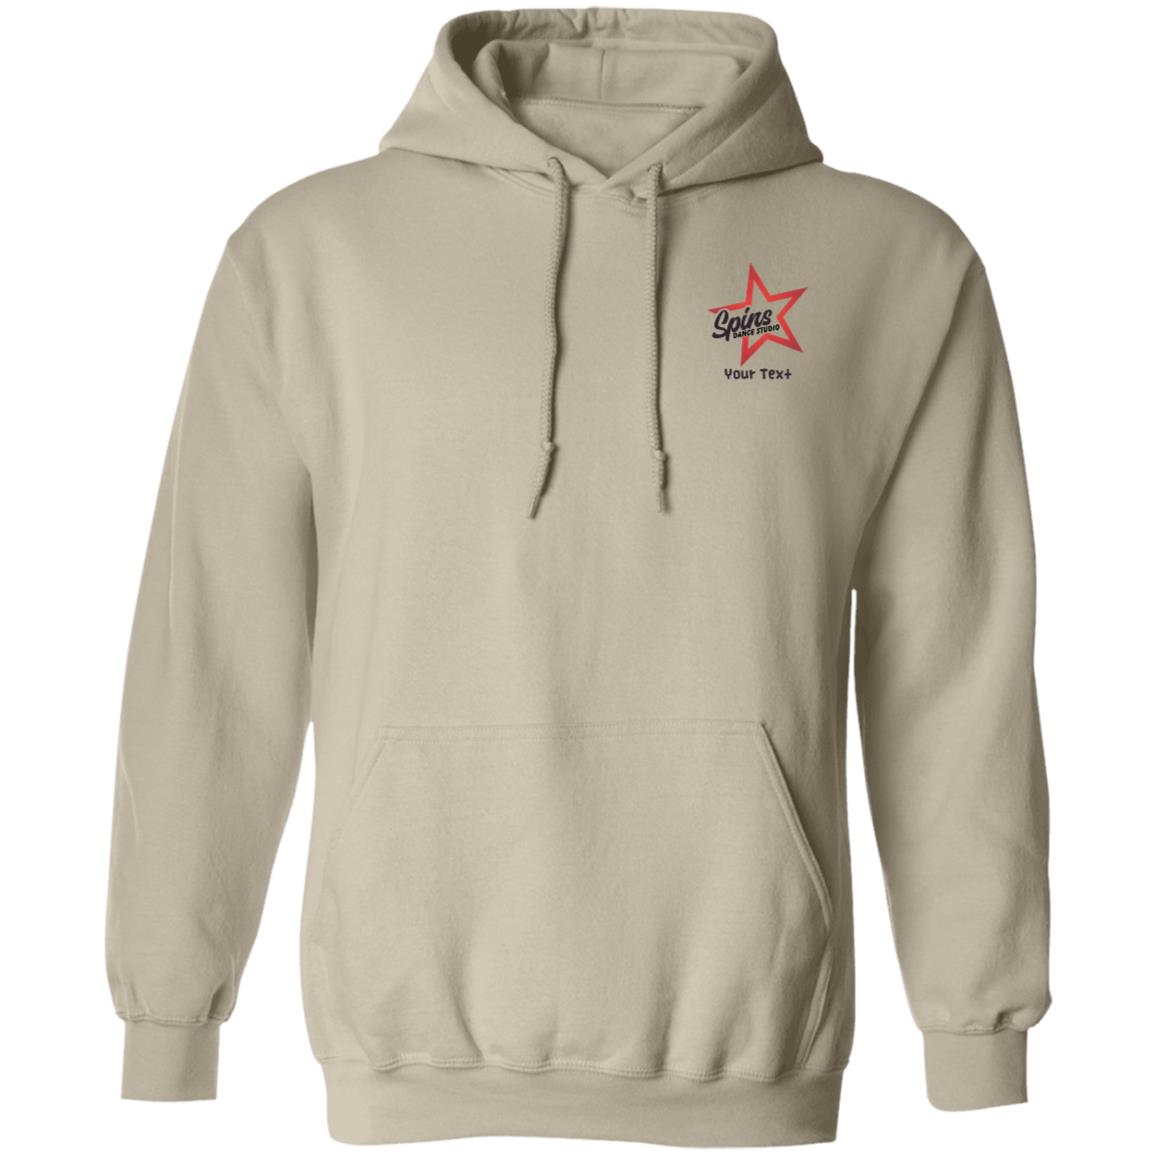 Spins Pullover Hoodie - With Personalization